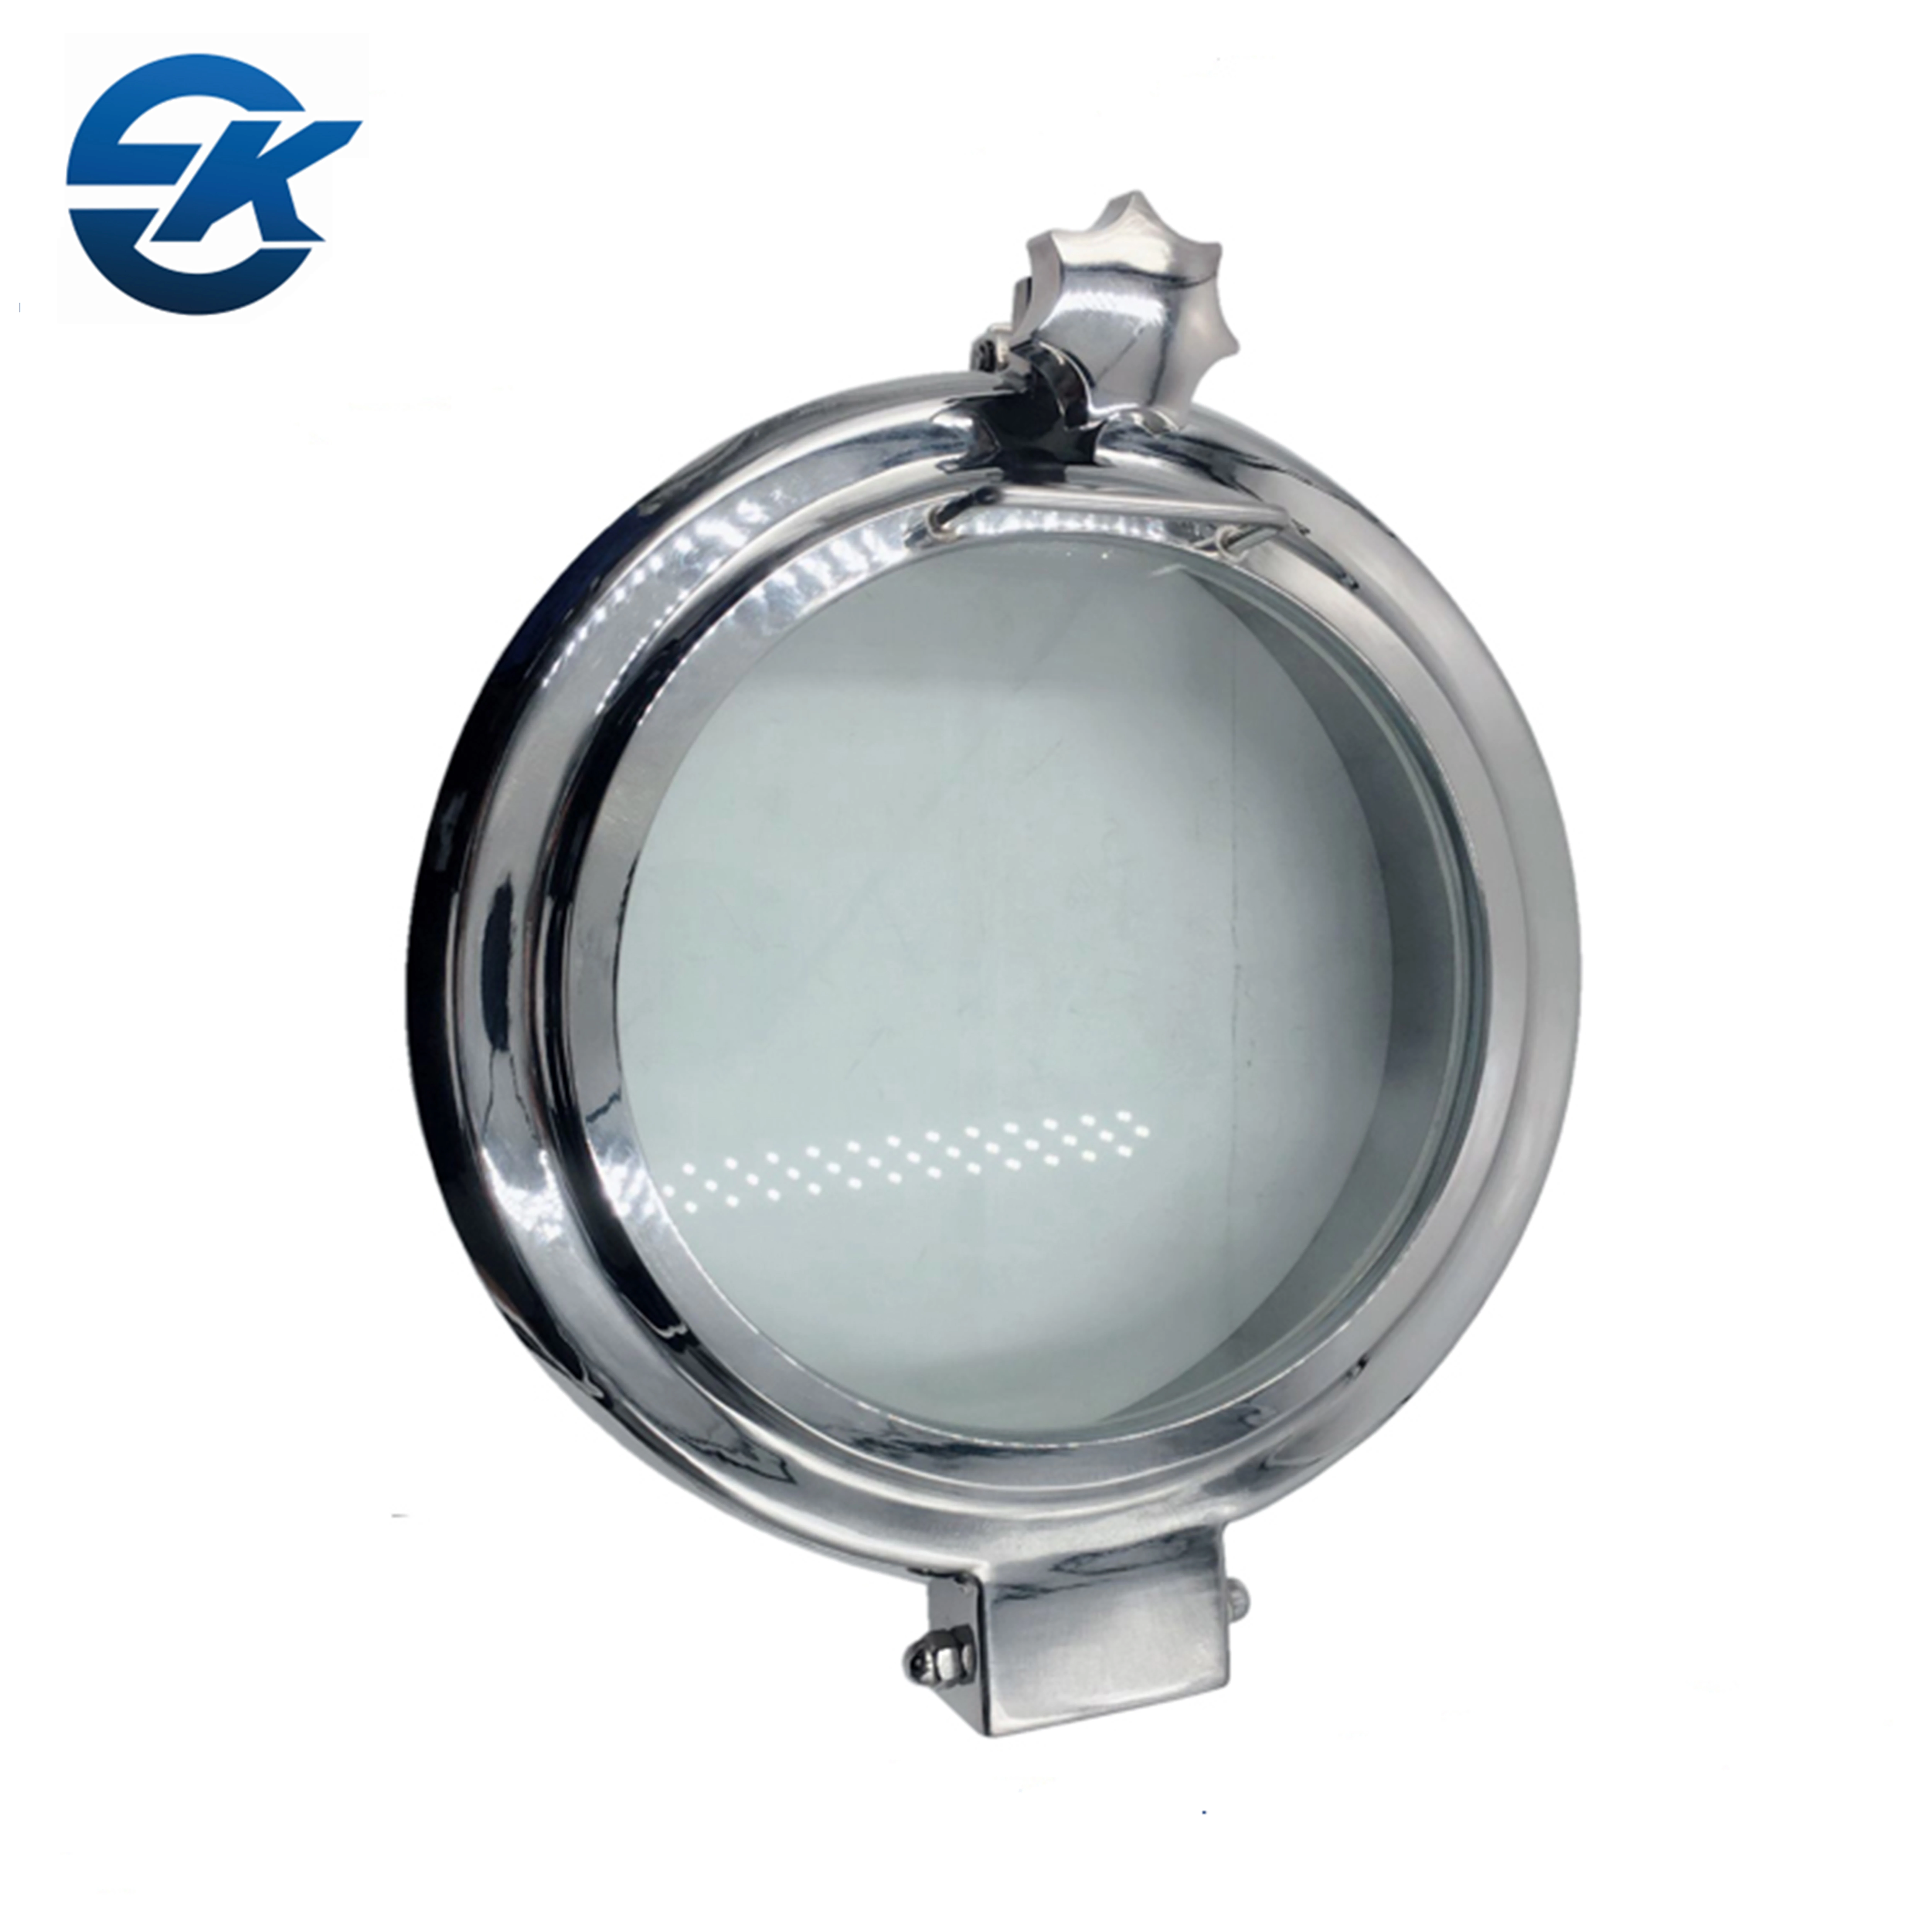 Food grade stainless steel SS304 tank manhole cover with sight glass